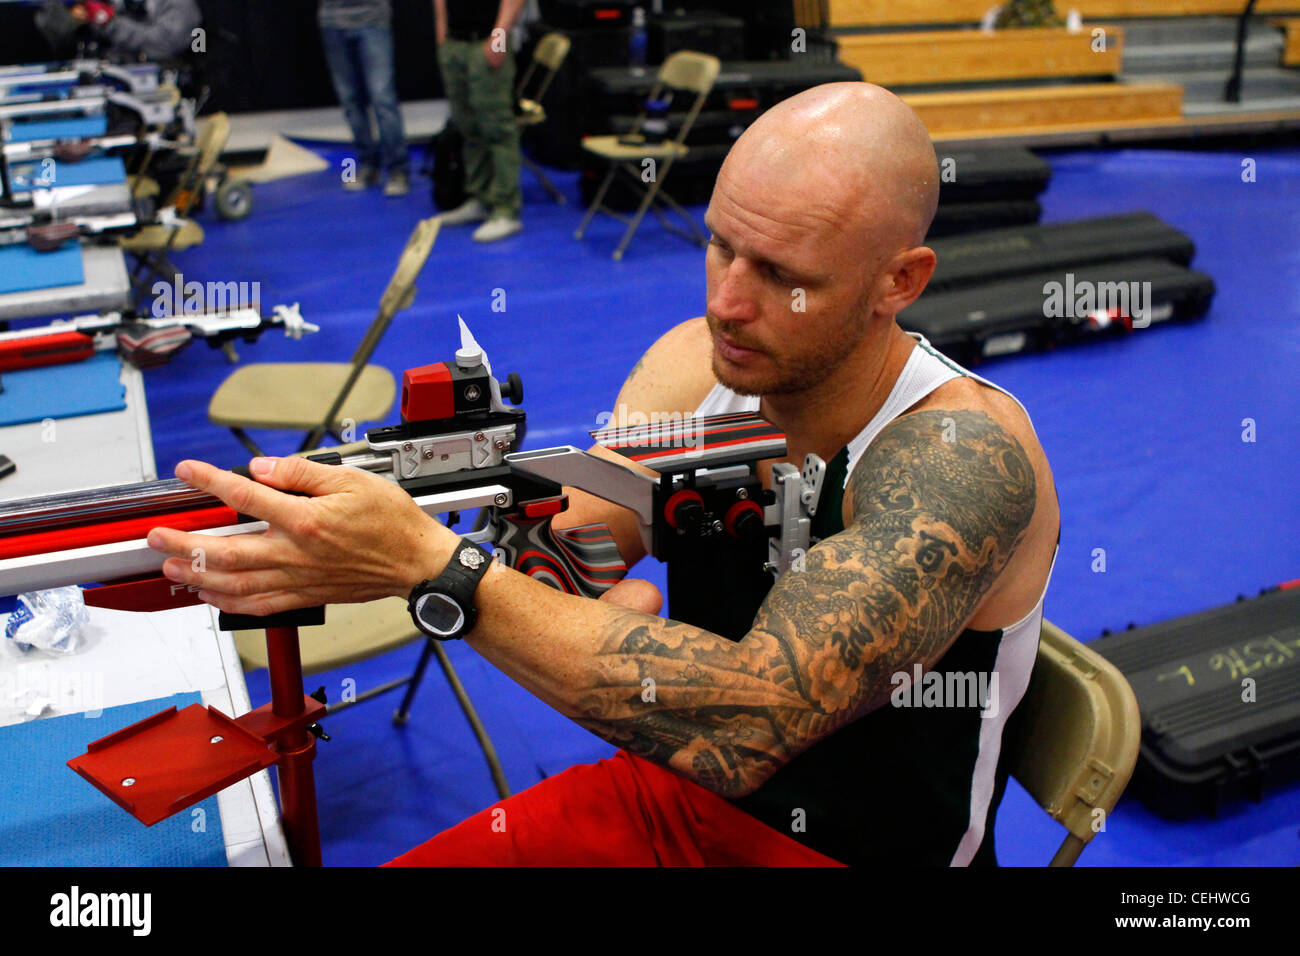 Active duty Australian sailor Paul de Gelder loads his rifle during practice at the Marine Corps Trials held on Marine Corps Base Camp Pendleton, Calif., Feb. 14, 2012. He is a member of the International team competing in the Trials, which are hosted by the United States Marine Corps Wounded Warrior Regiment. Stock Photo